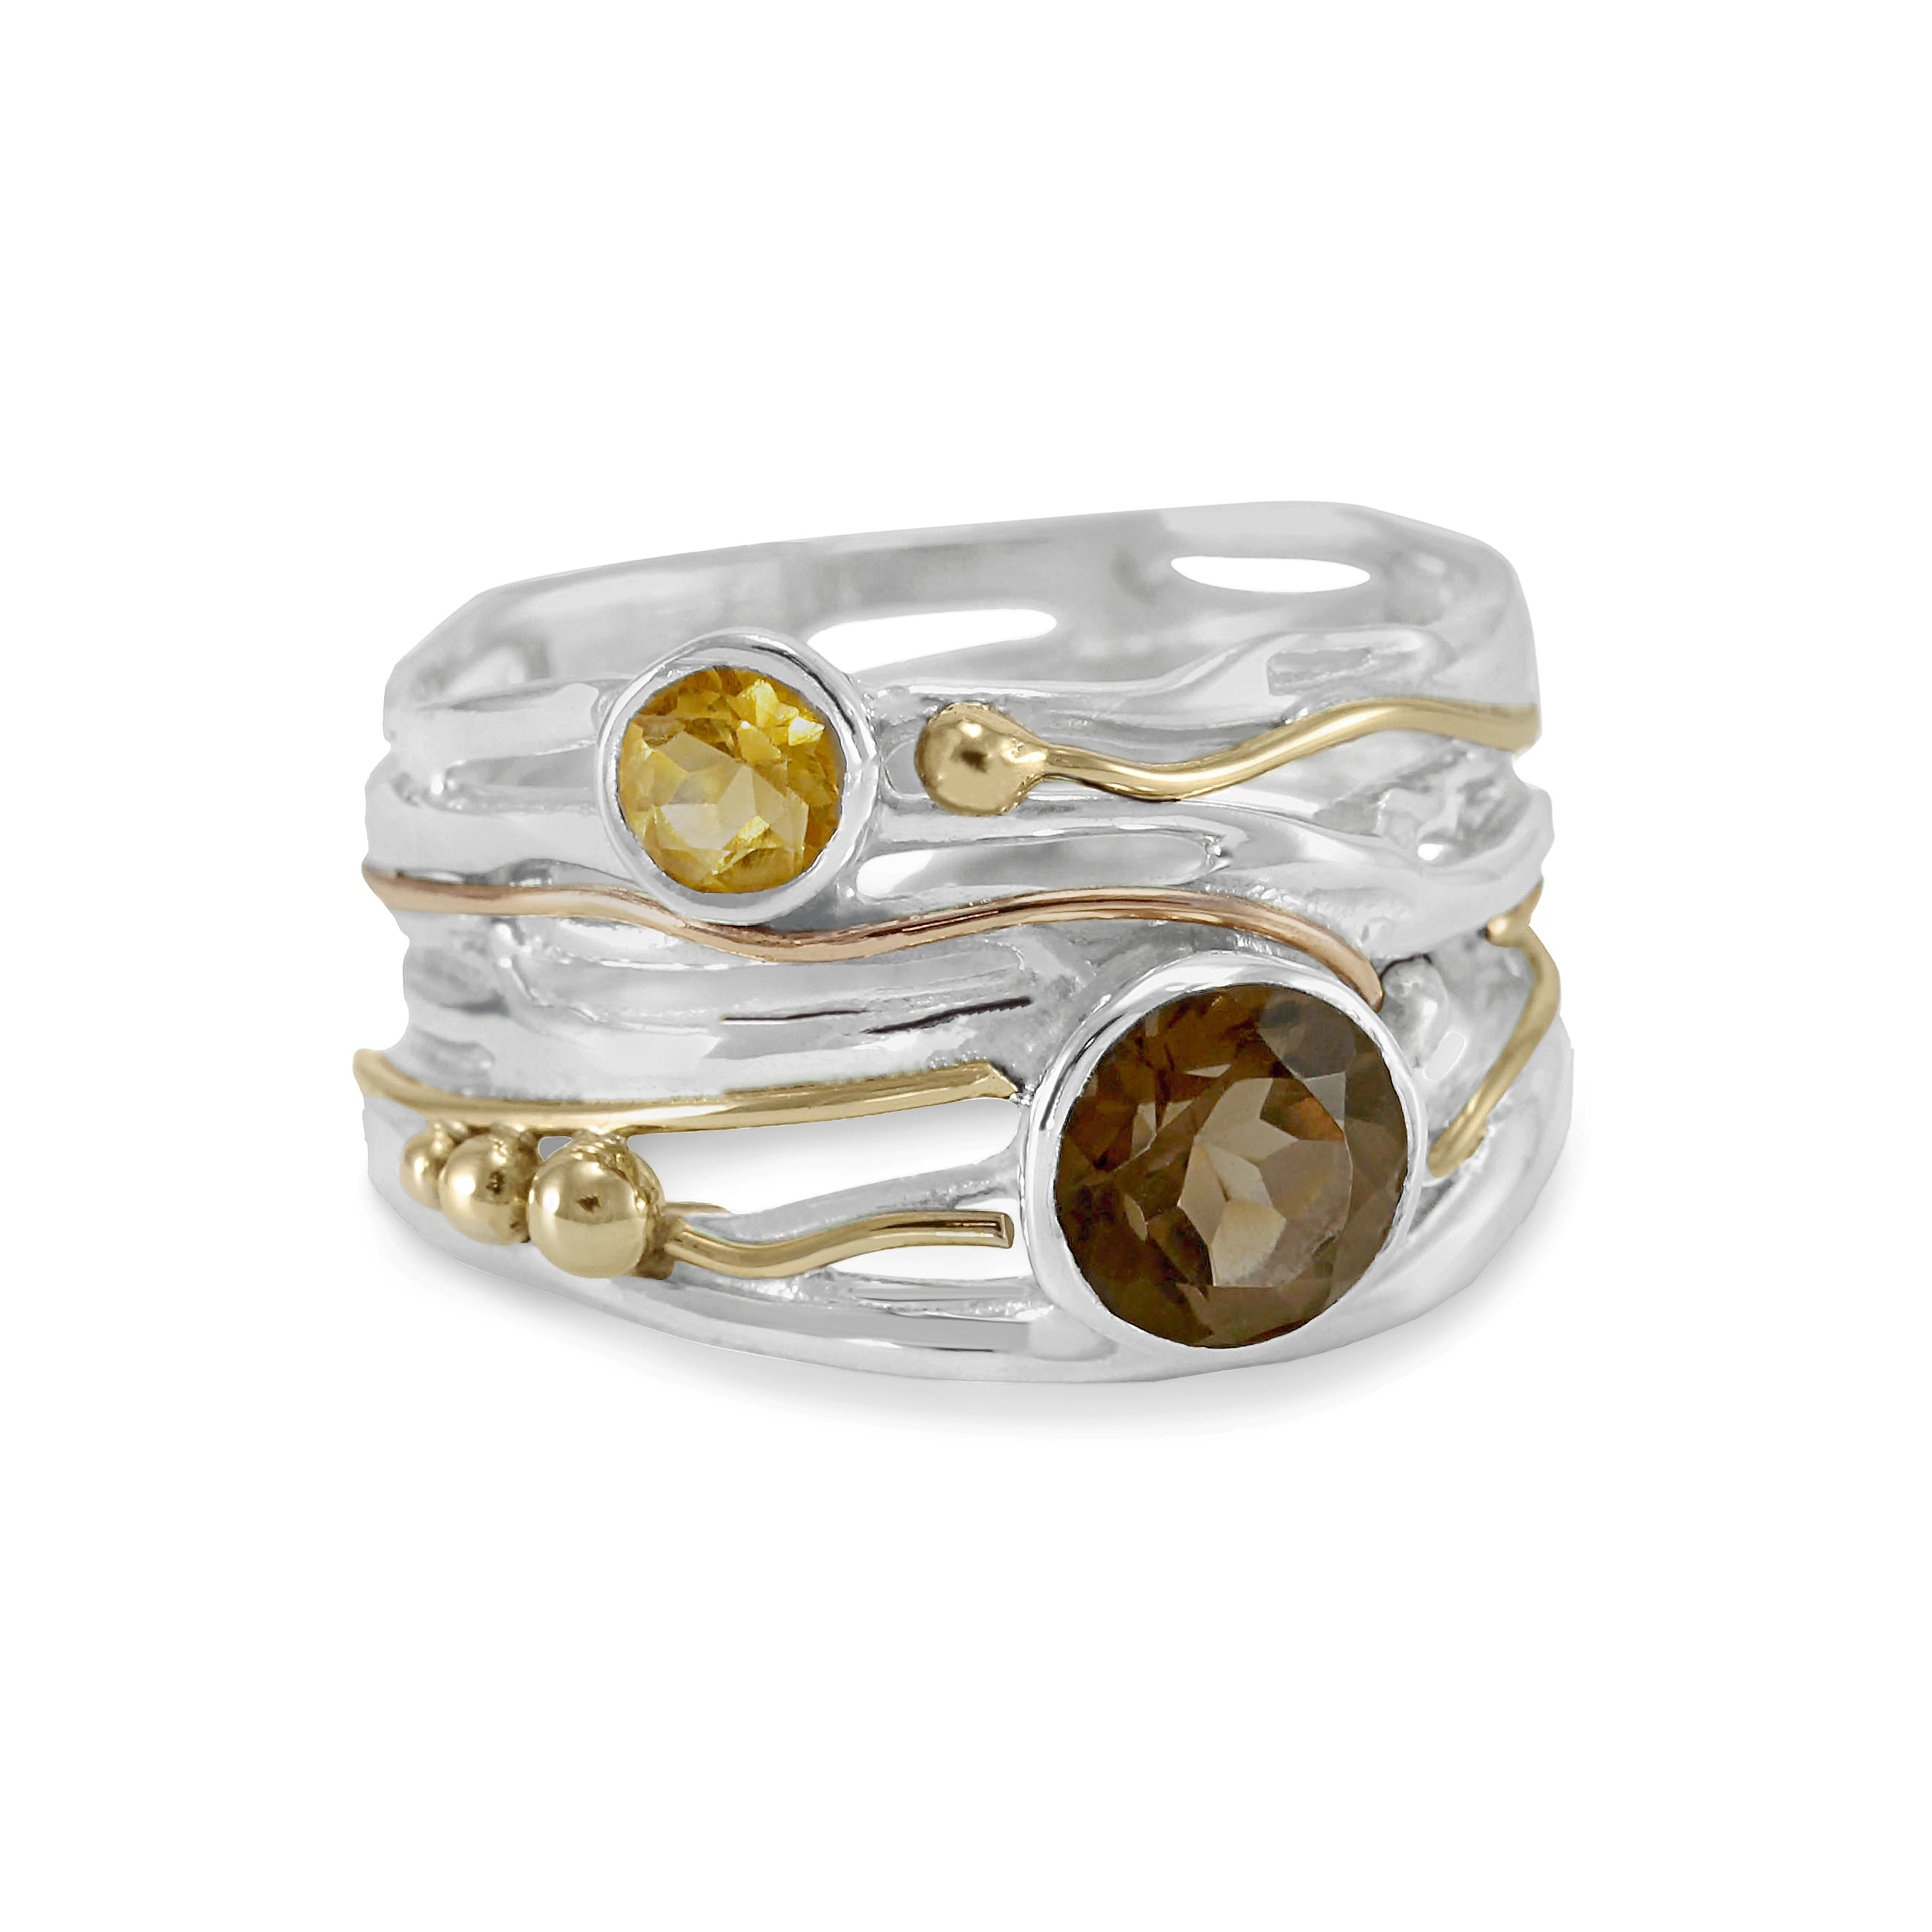 Smoky Quartz & Citrine Ring in Sterling Silver with Gold Details